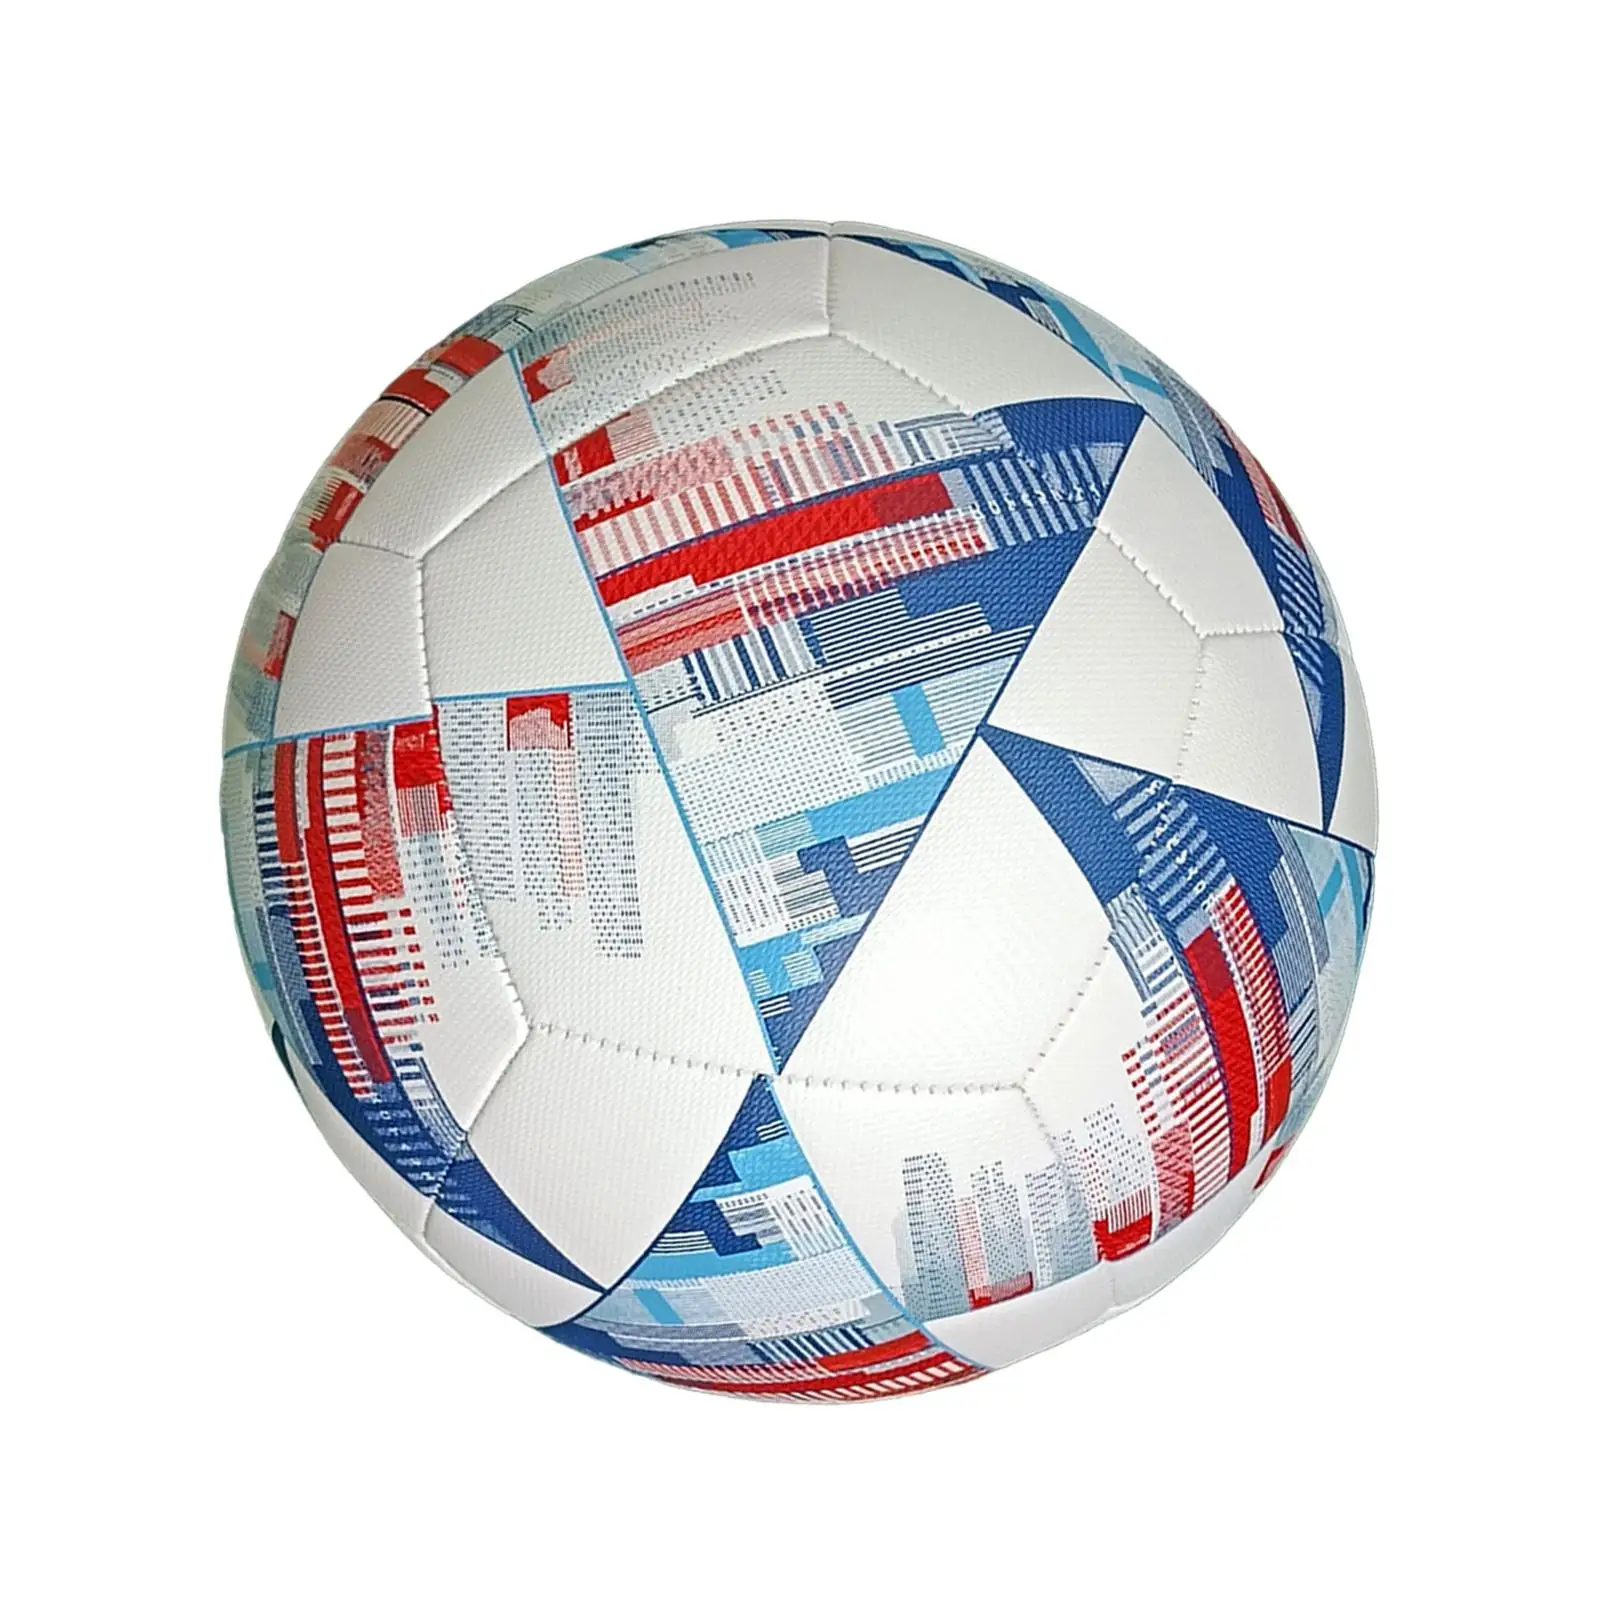 Soccer Ball Size 5 Lightweight PU Leather Seamless Stitching Football Match Ball for Game Competition School Practice Kids Gifts